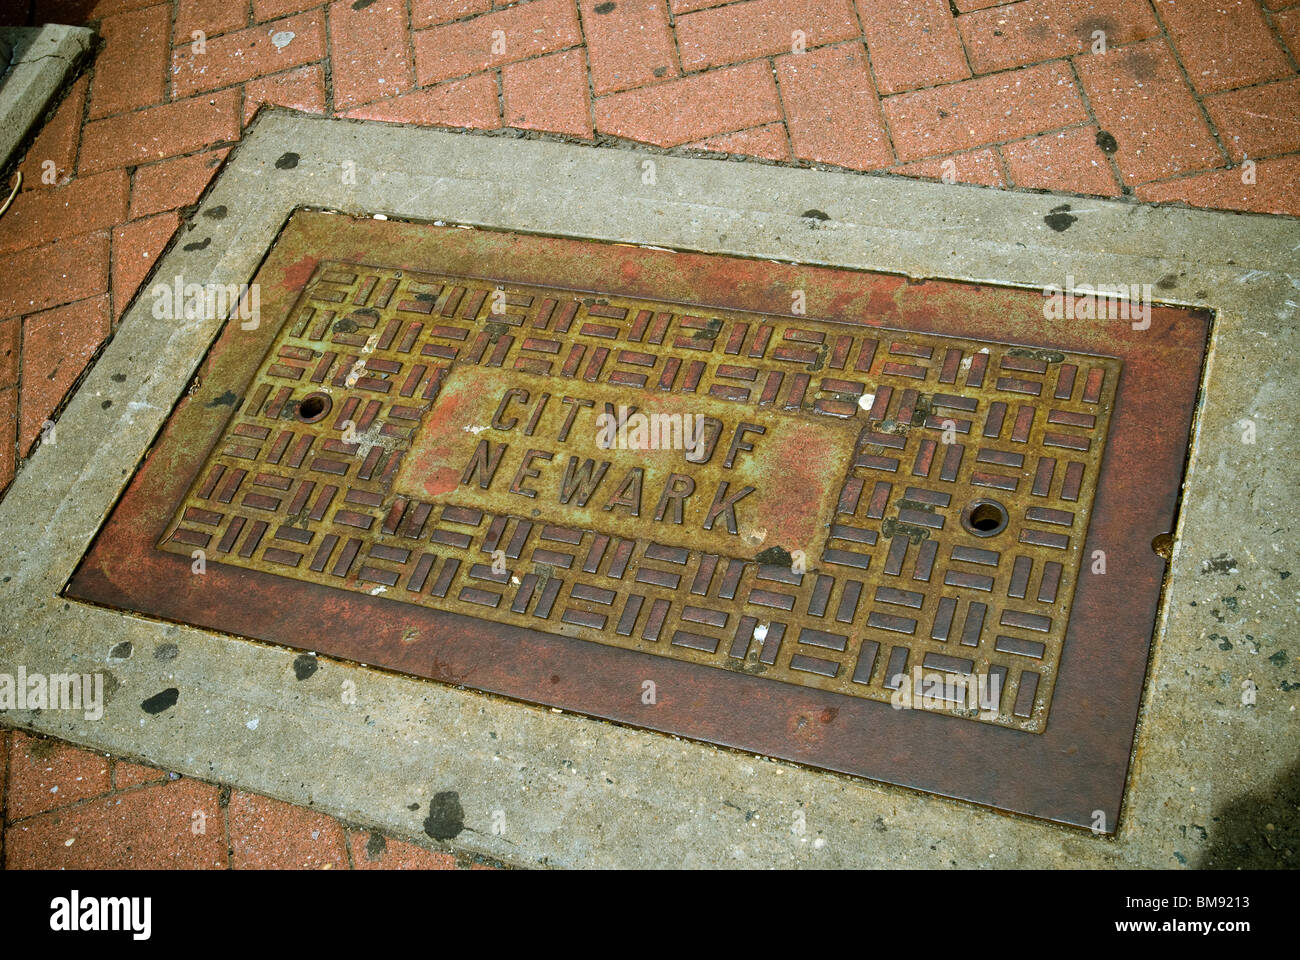 An access port for underground infrastructure is seen on the street in Newark, NJ on Saturday, May 22, 2010. Stock Photo